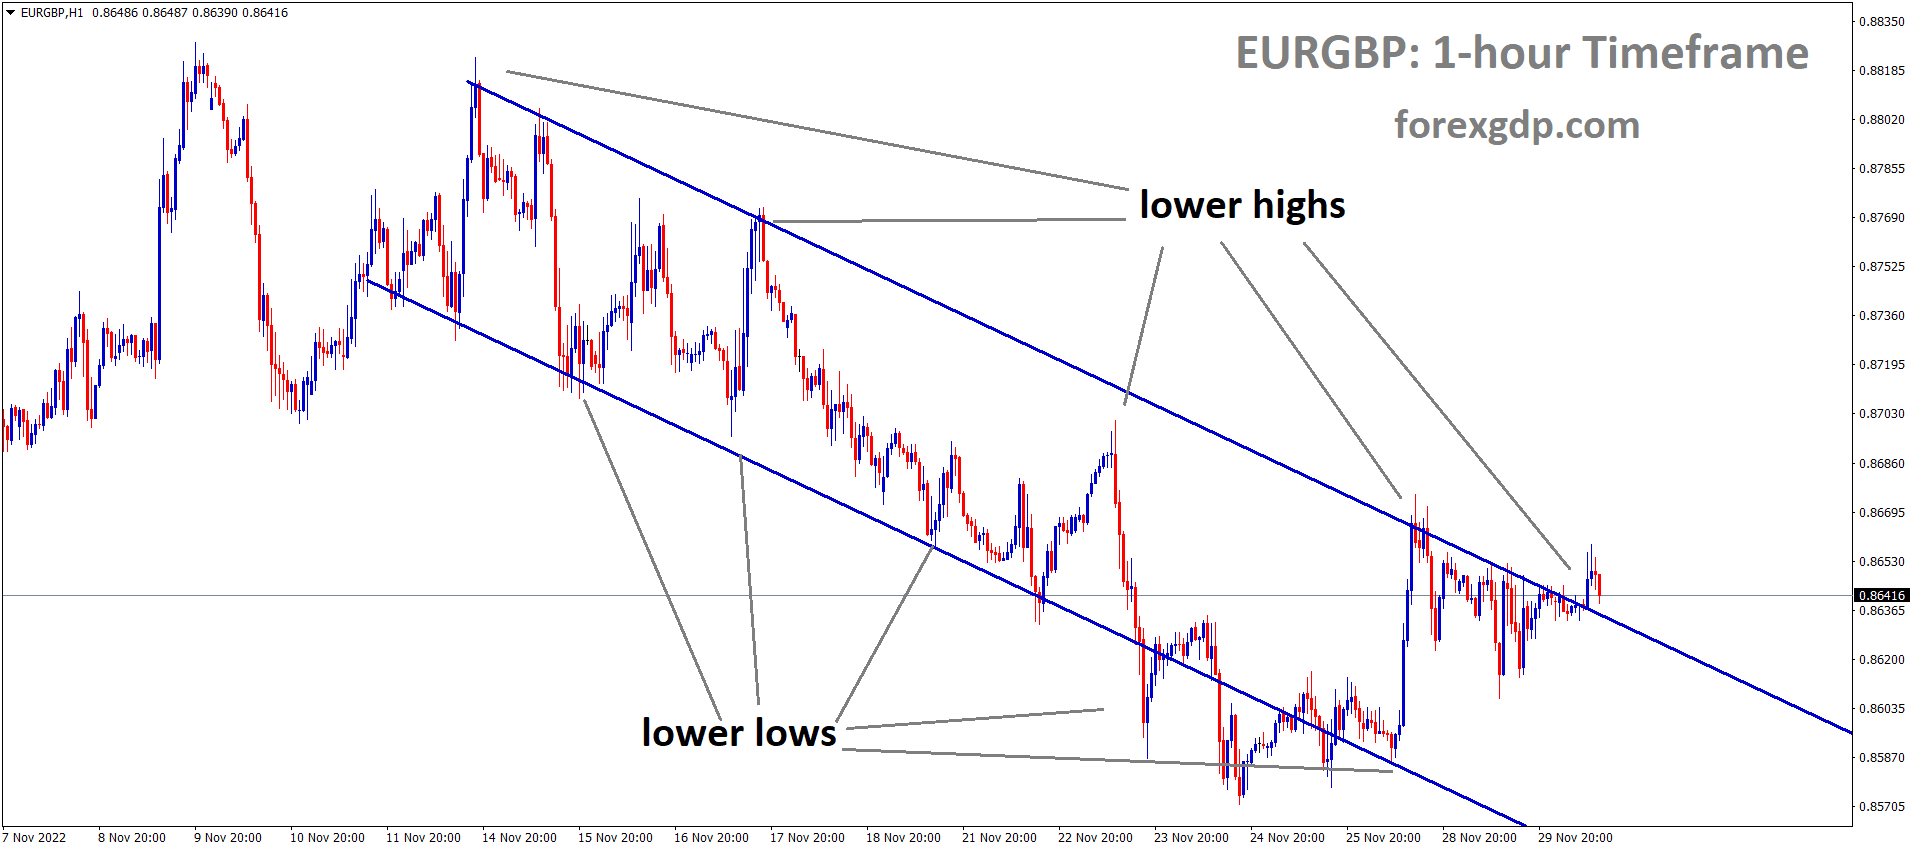 EURGBP is moving in the Descending channel and the market has reached the lower high area of the channel 1